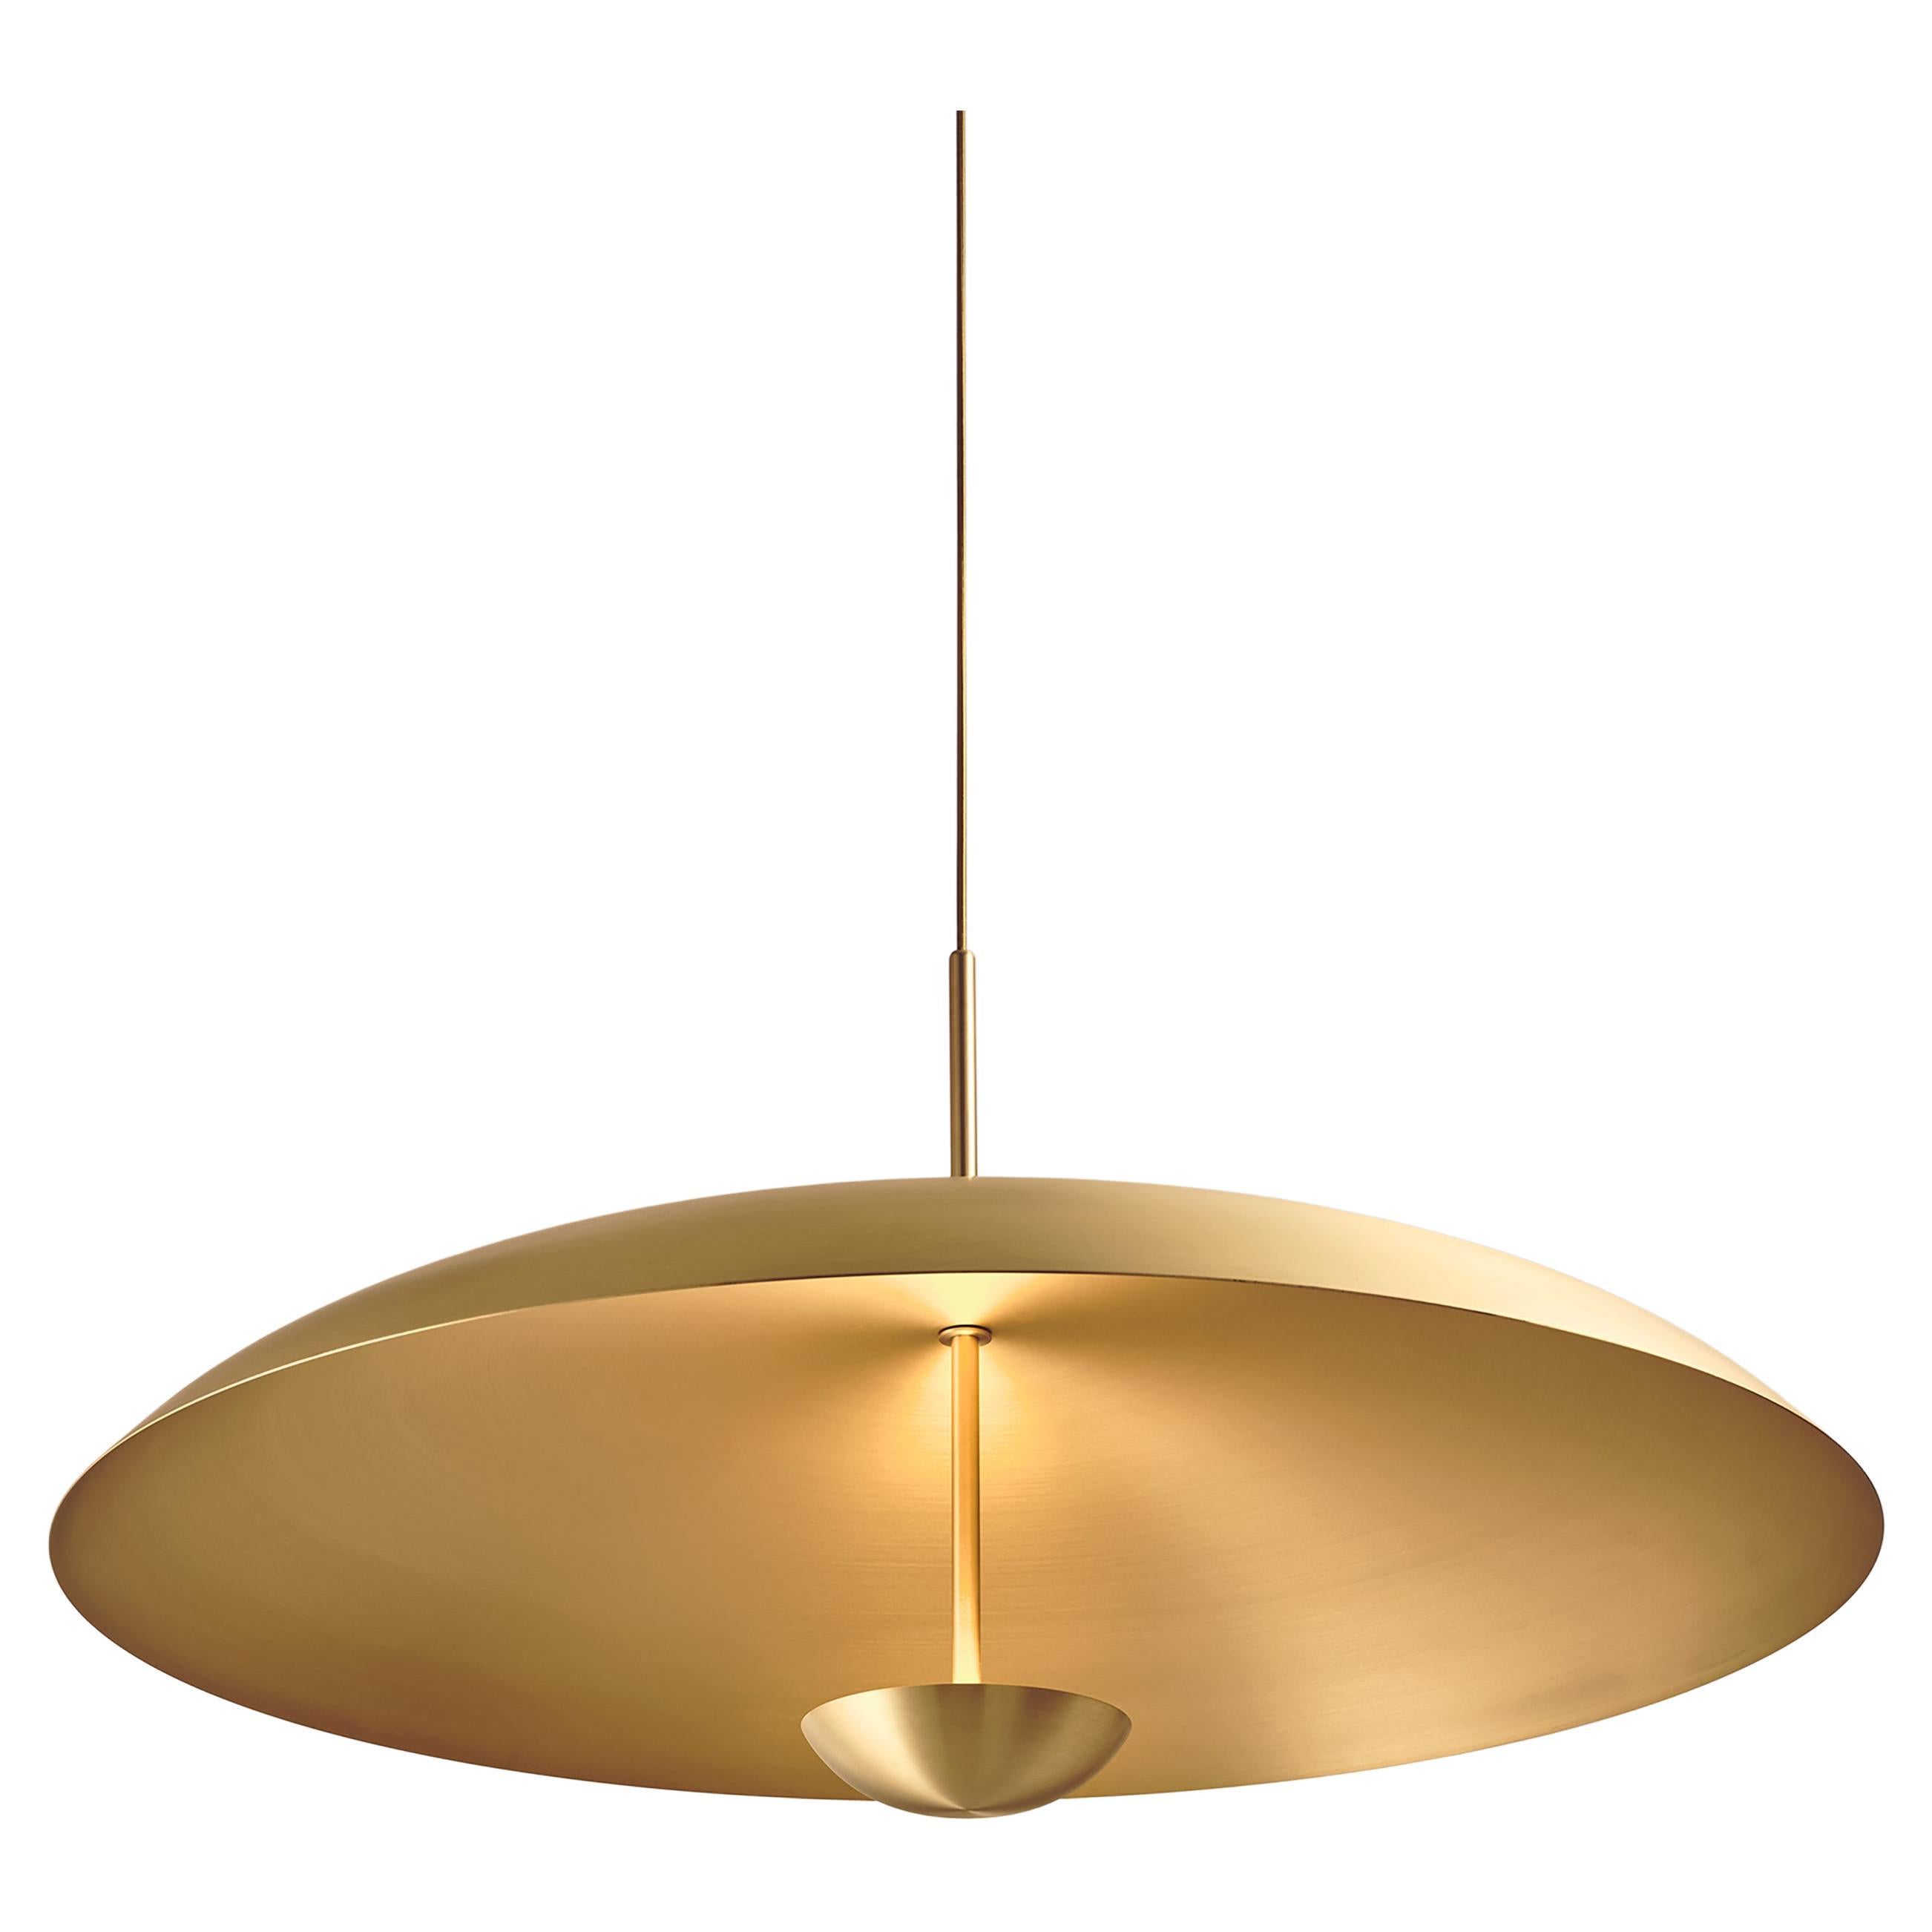 'Cosmic Sol Pendant 70' Handmade Satin Brass Finished Ceiling Lamp For Sale